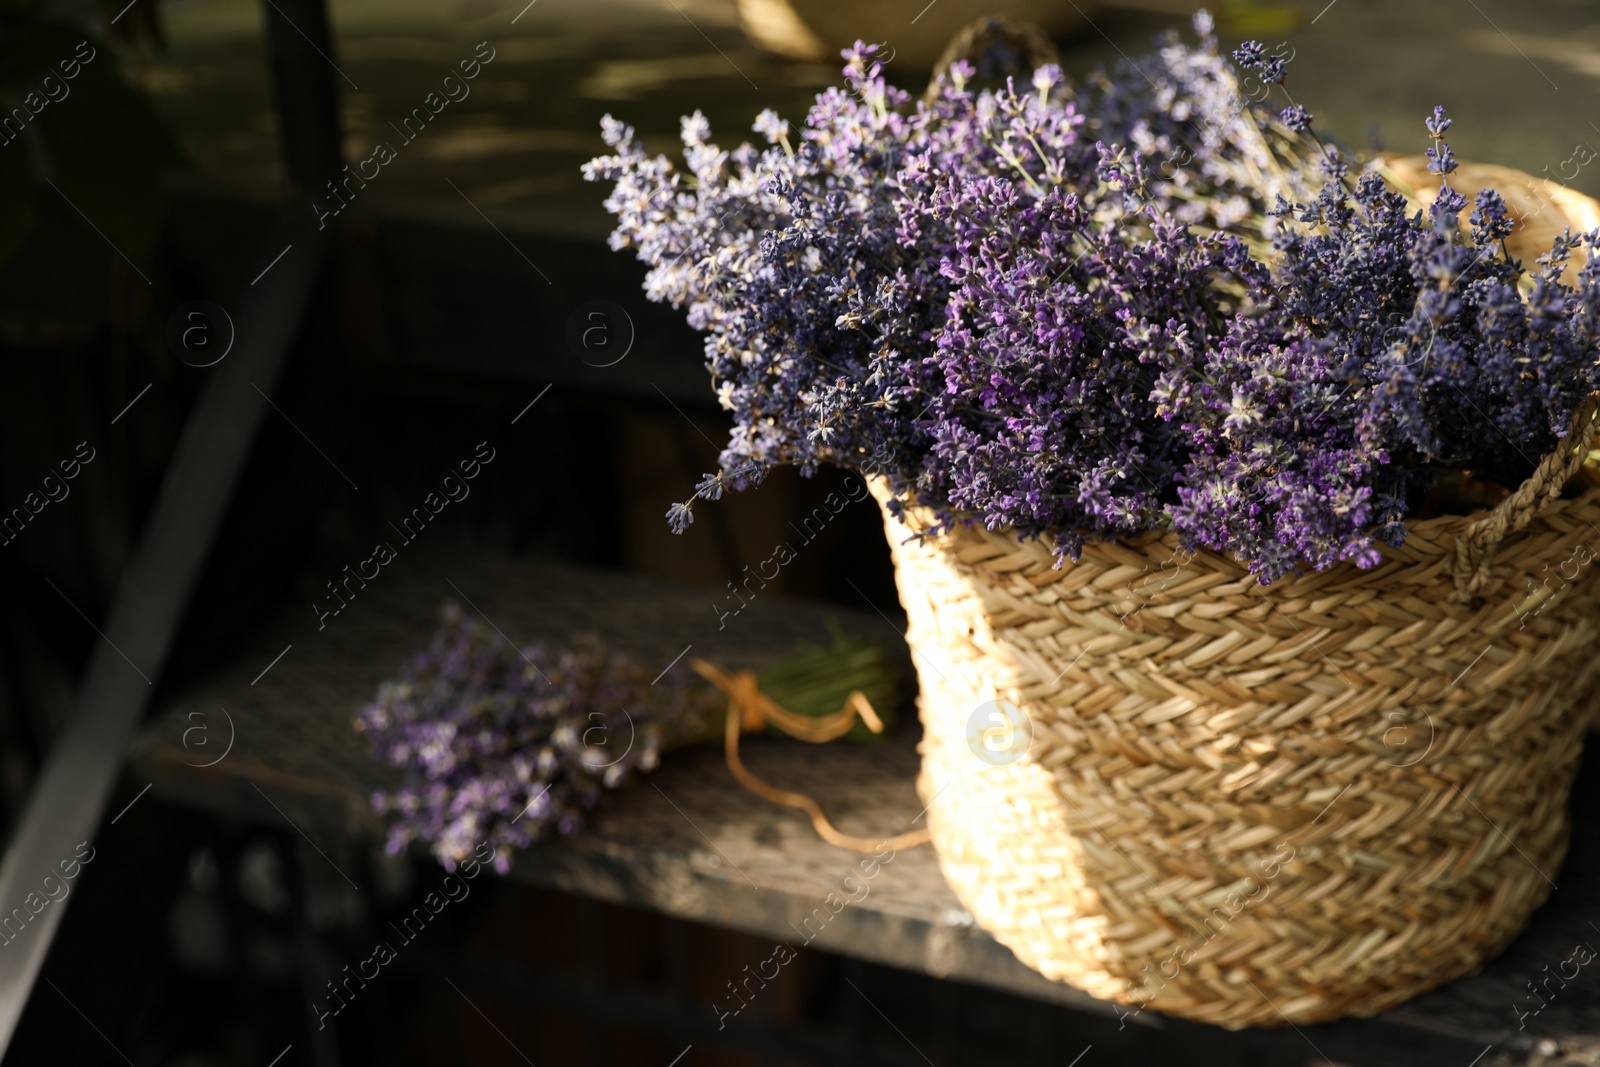 Photo of Wicker basket with beautiful lavender flowers on metal stairs outdoors